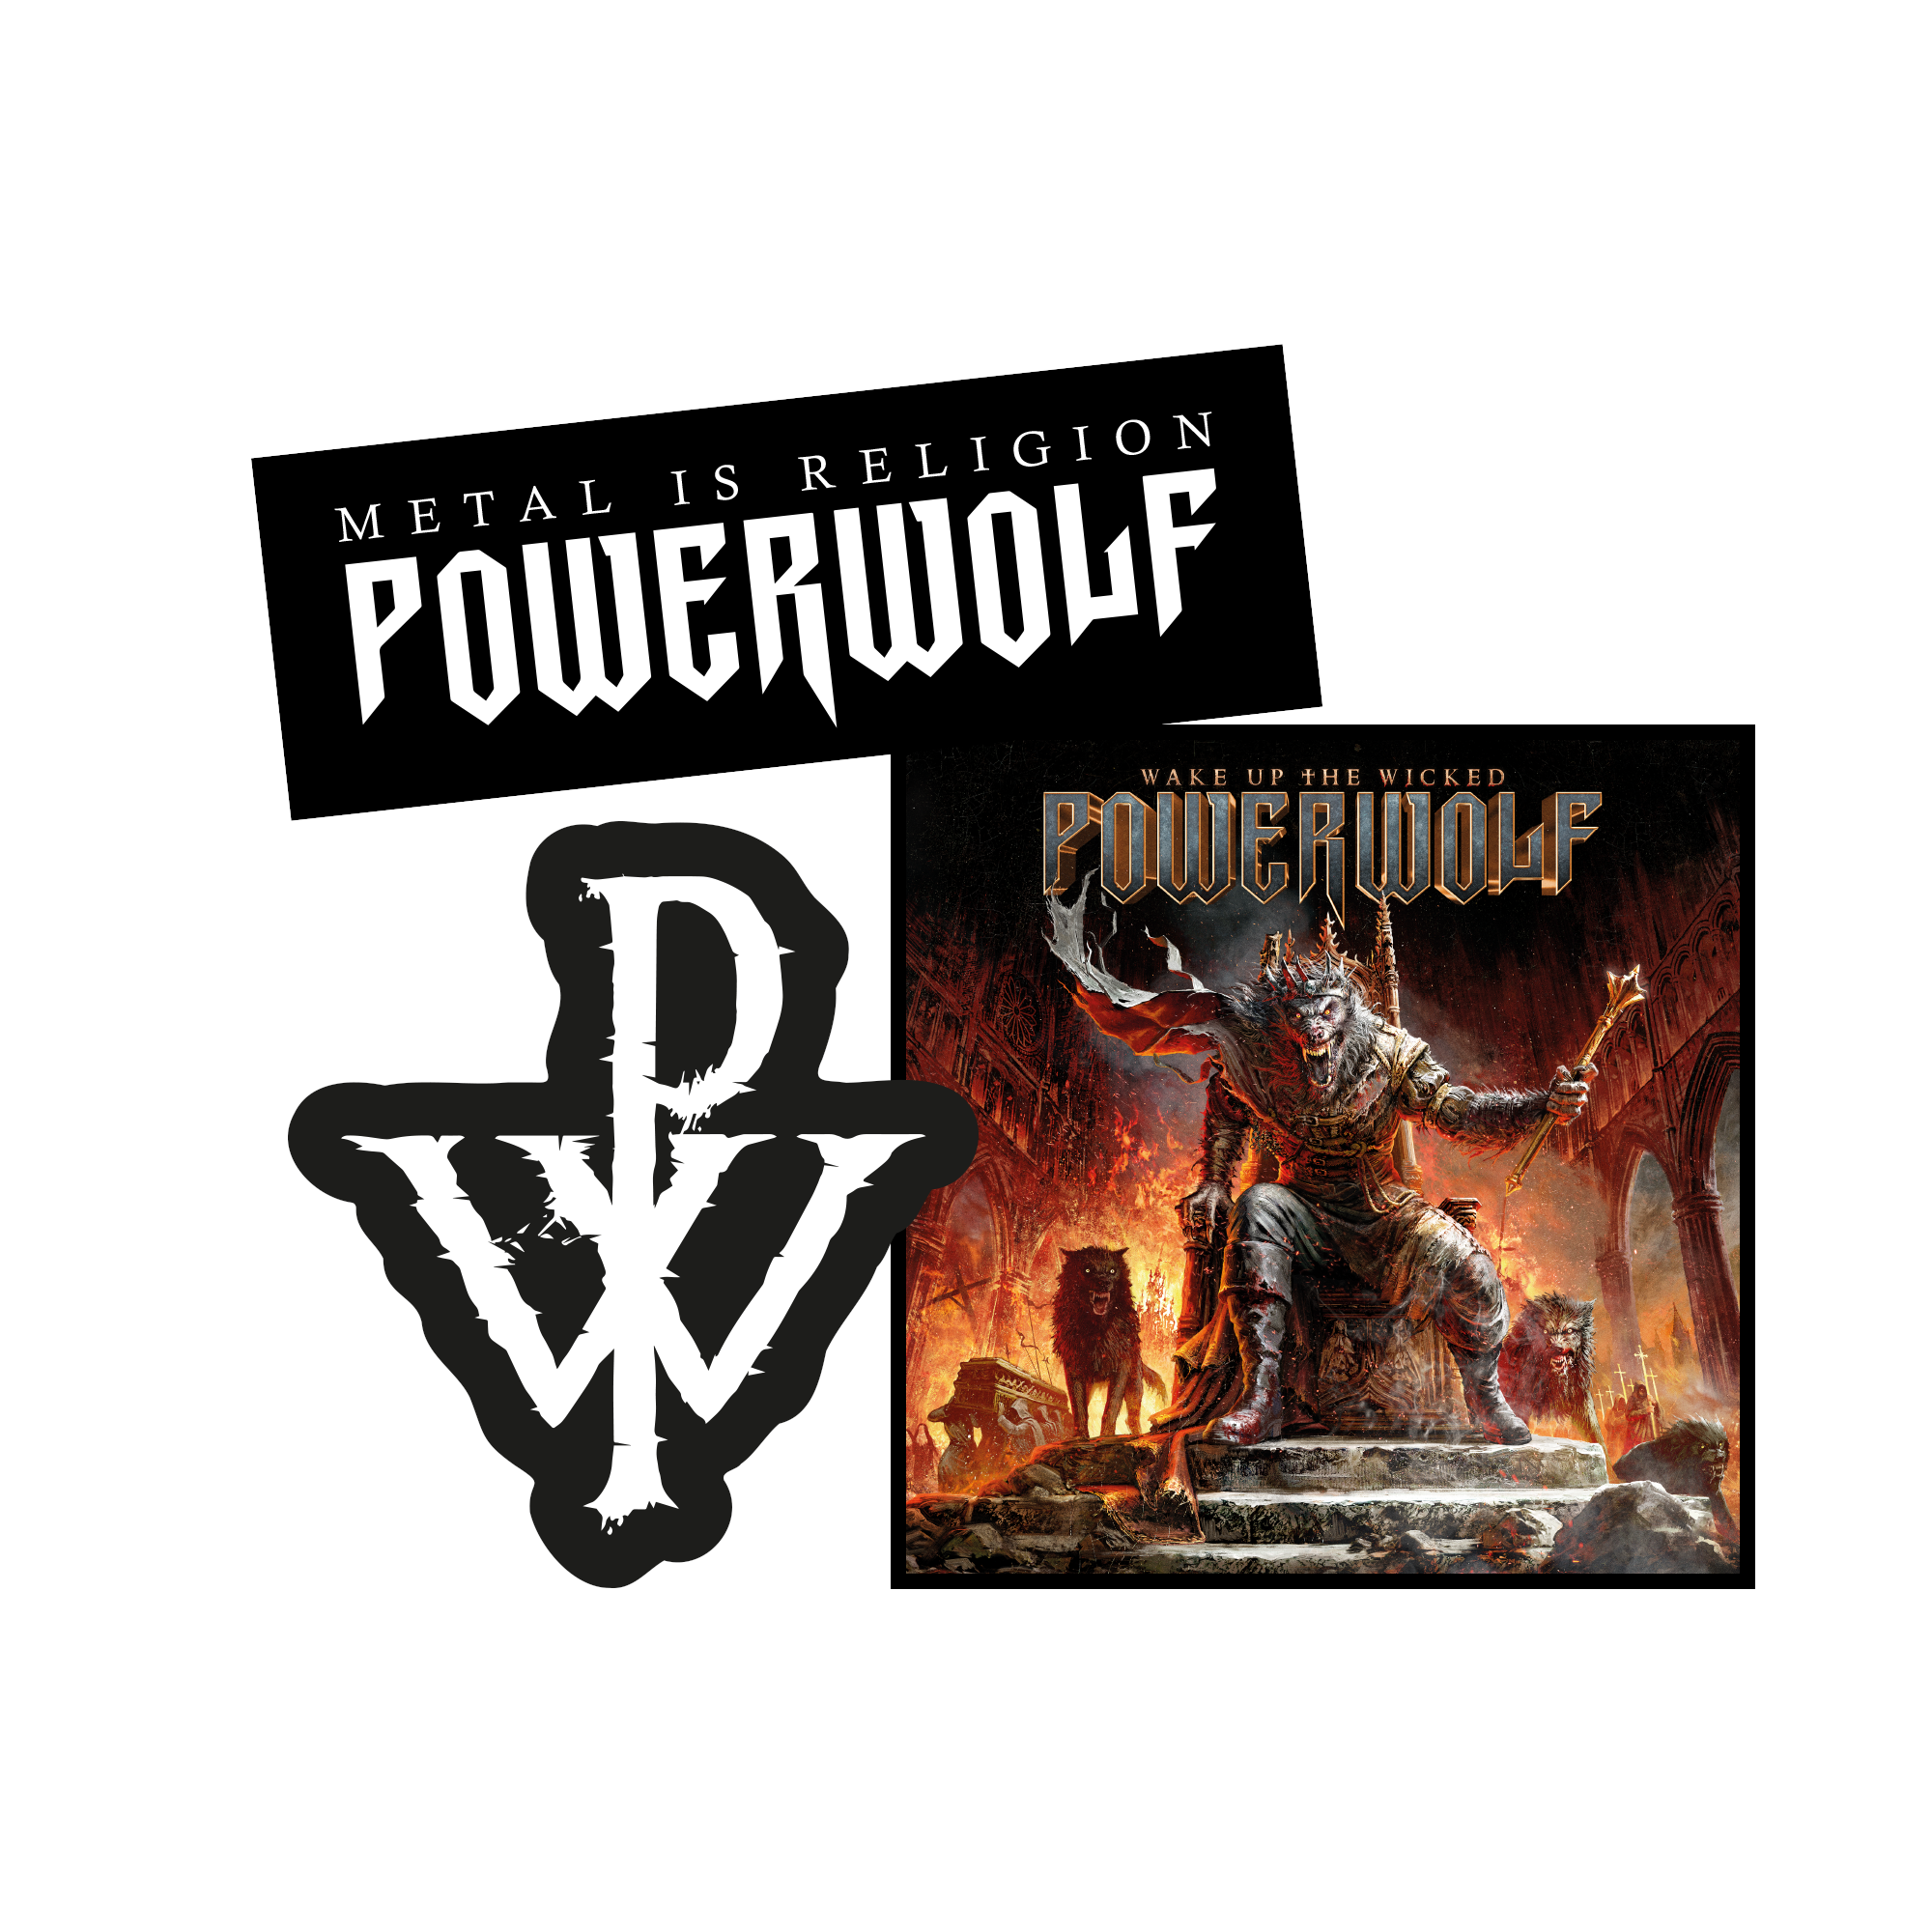 https://images.bravado.de/prod/product-assets/product-asset-data/powerwolf/powerwolf/products/508351/web/446245/image-thumb__446245__3000x3000_original/Powerwolf-Wake-Up-The-Wicked-Patch-mehrfarbig-508351-446245.c0064cdb.png